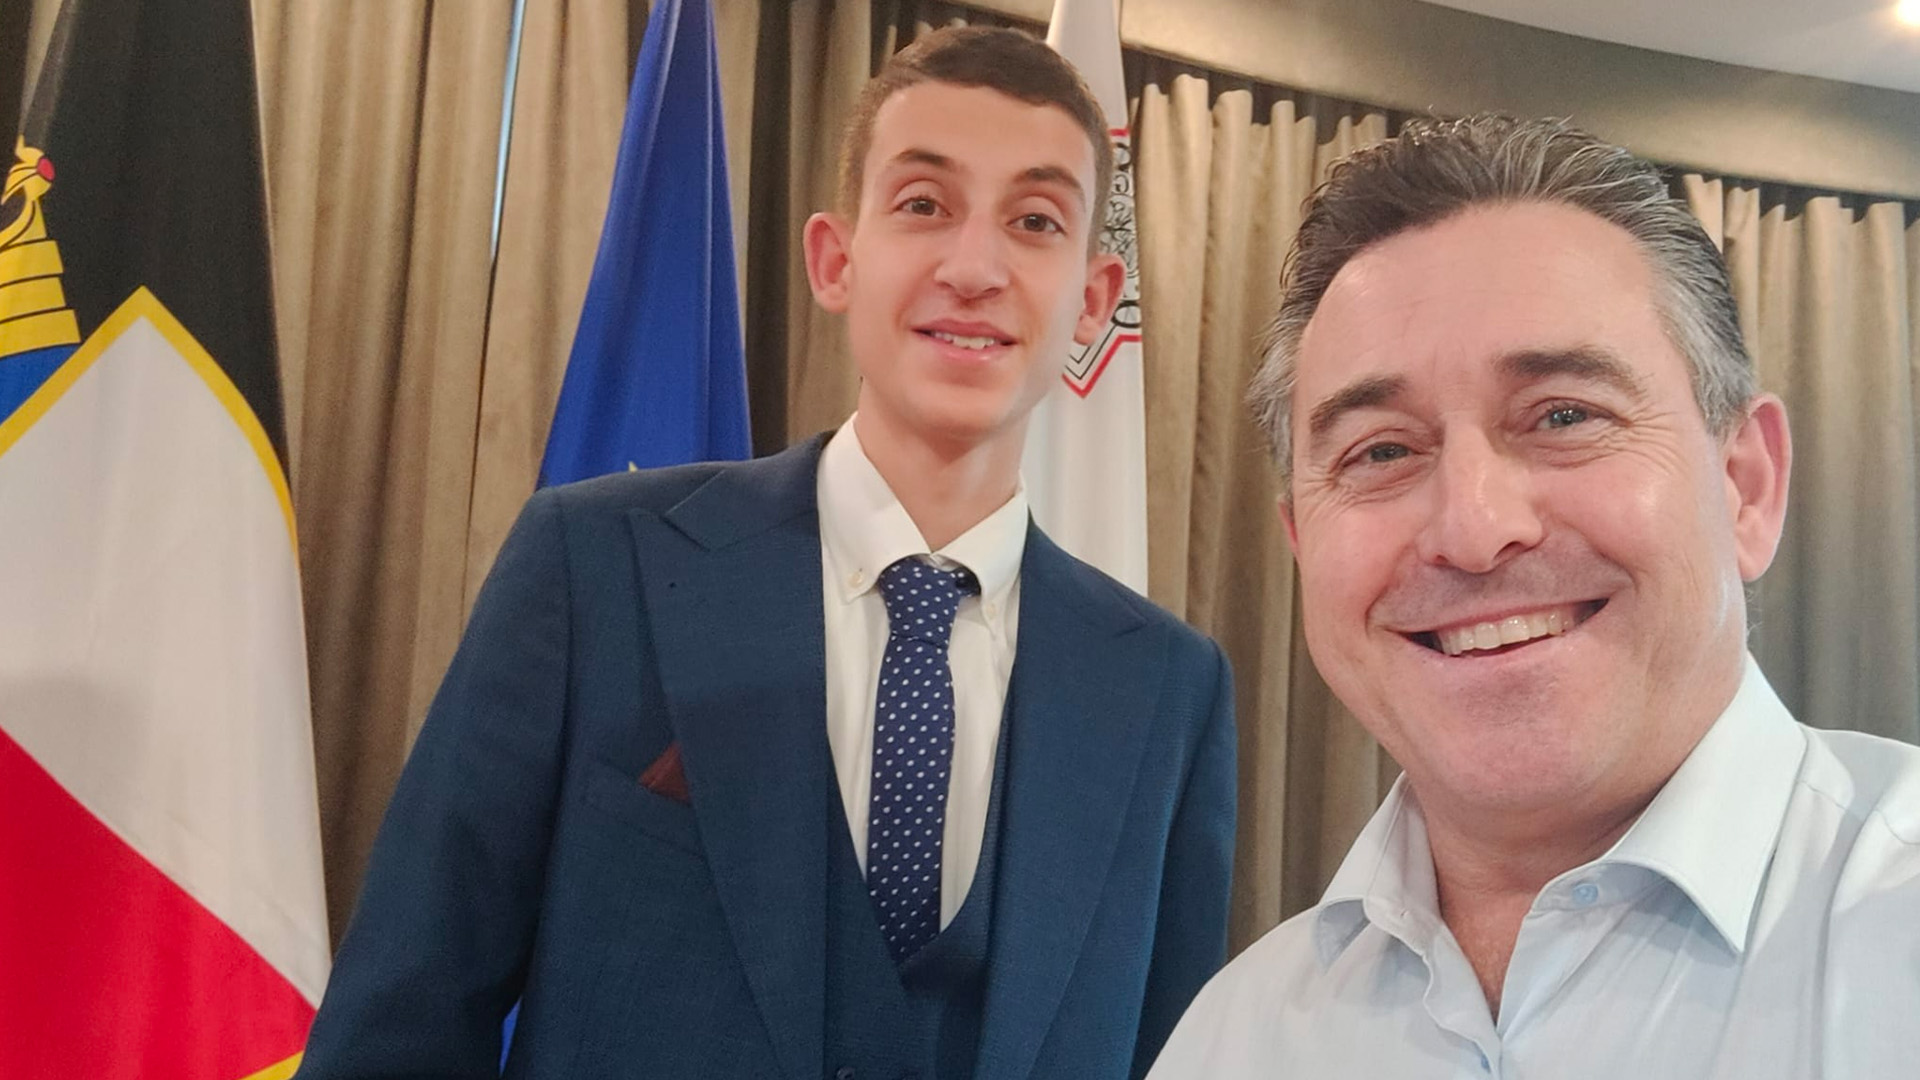 Bernard Grech & Young David Spend Day Together for 'Leaders For A Day'